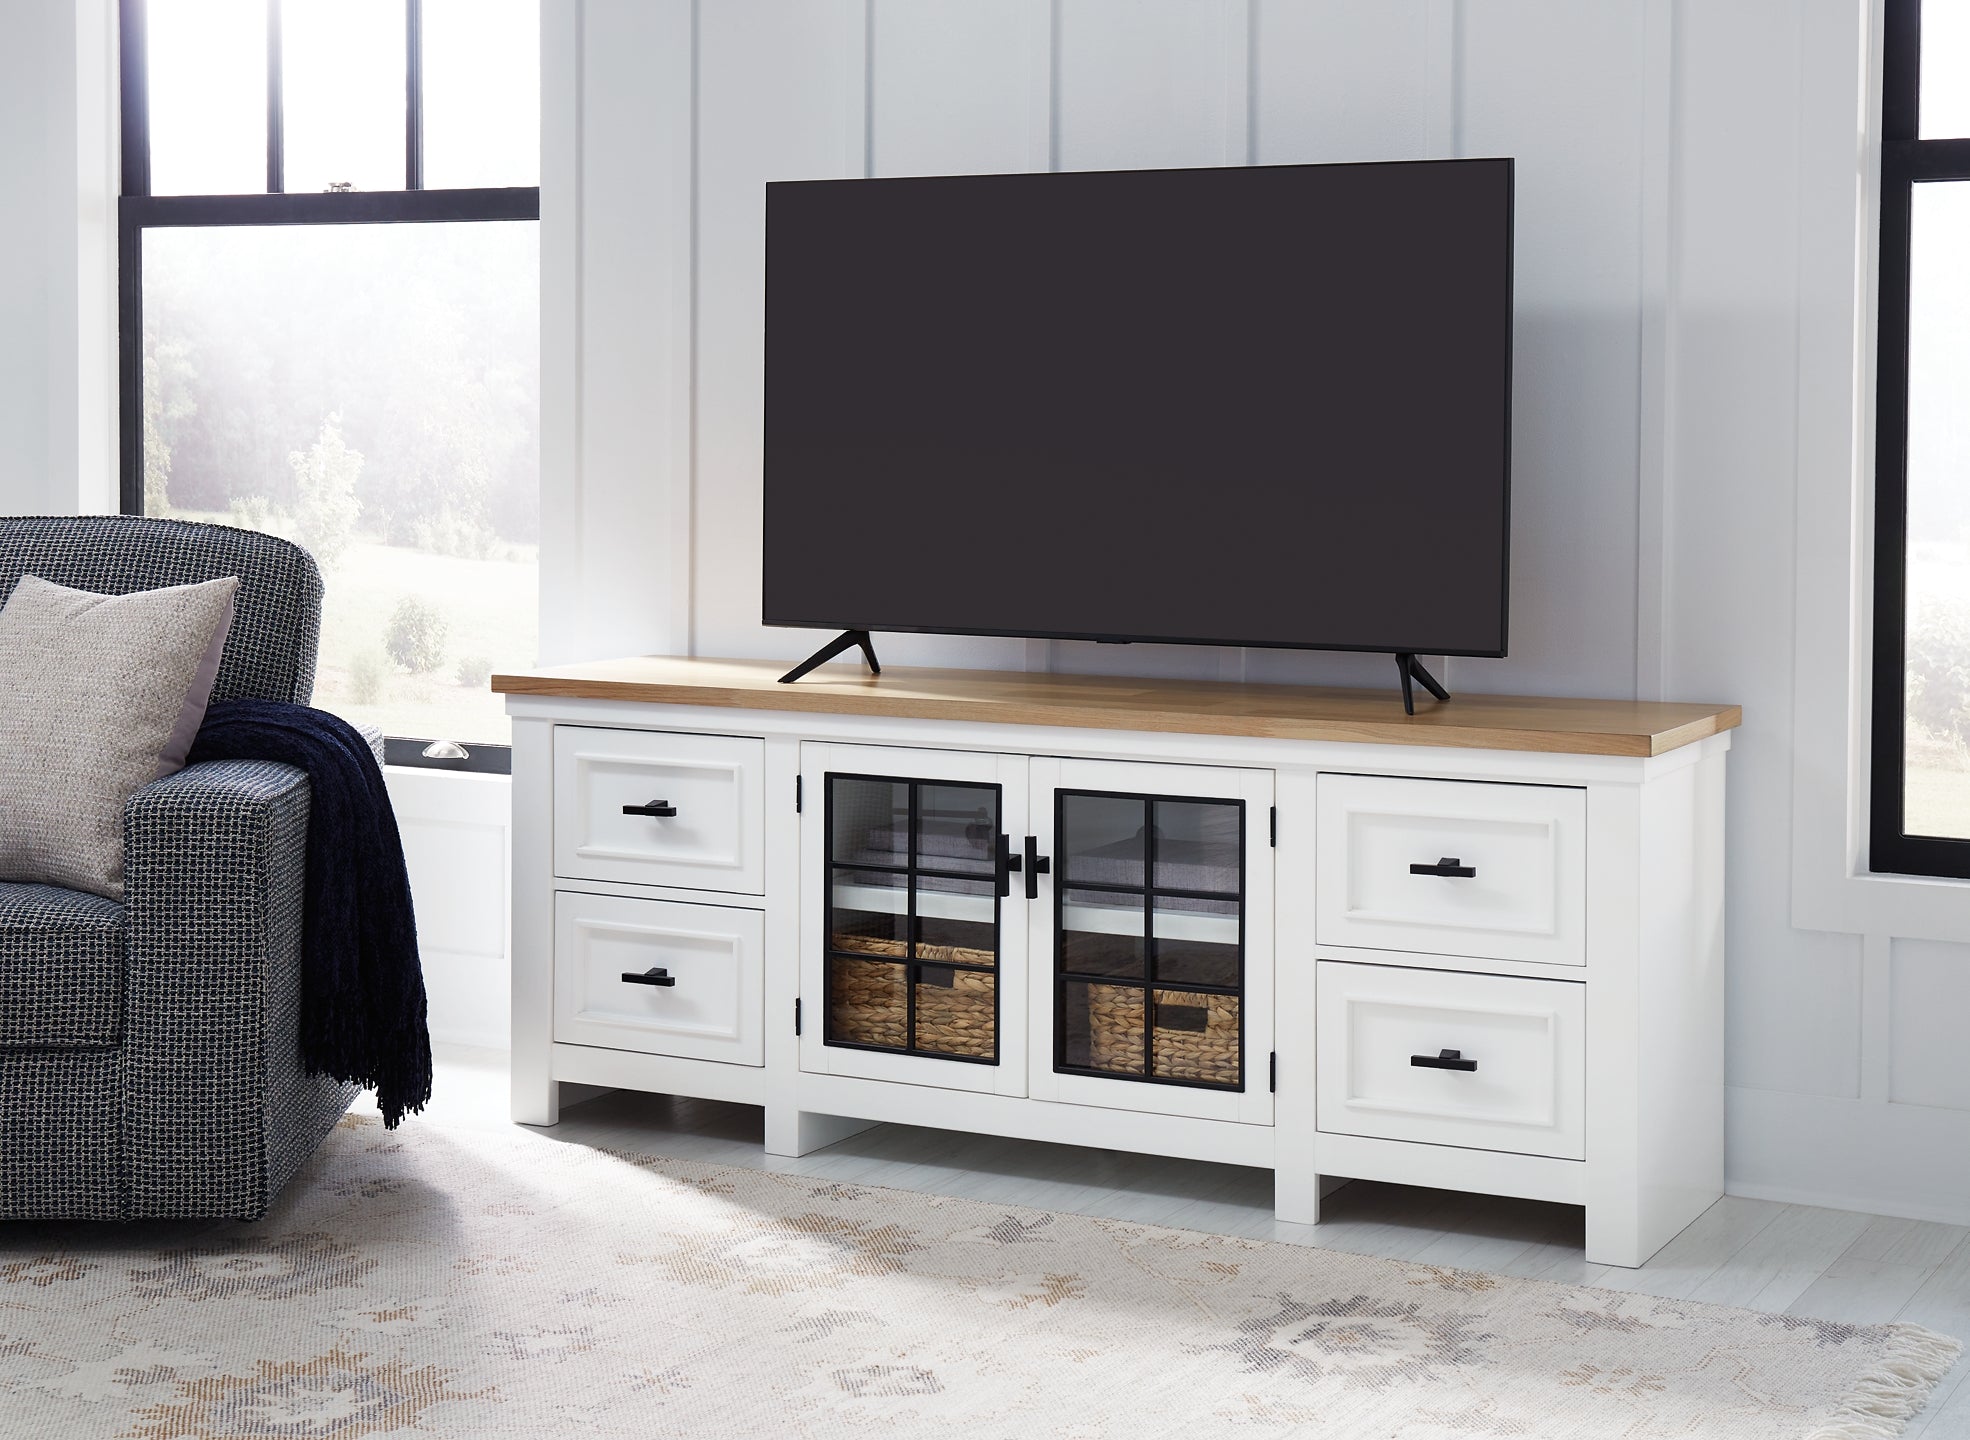 extra tall tv stands